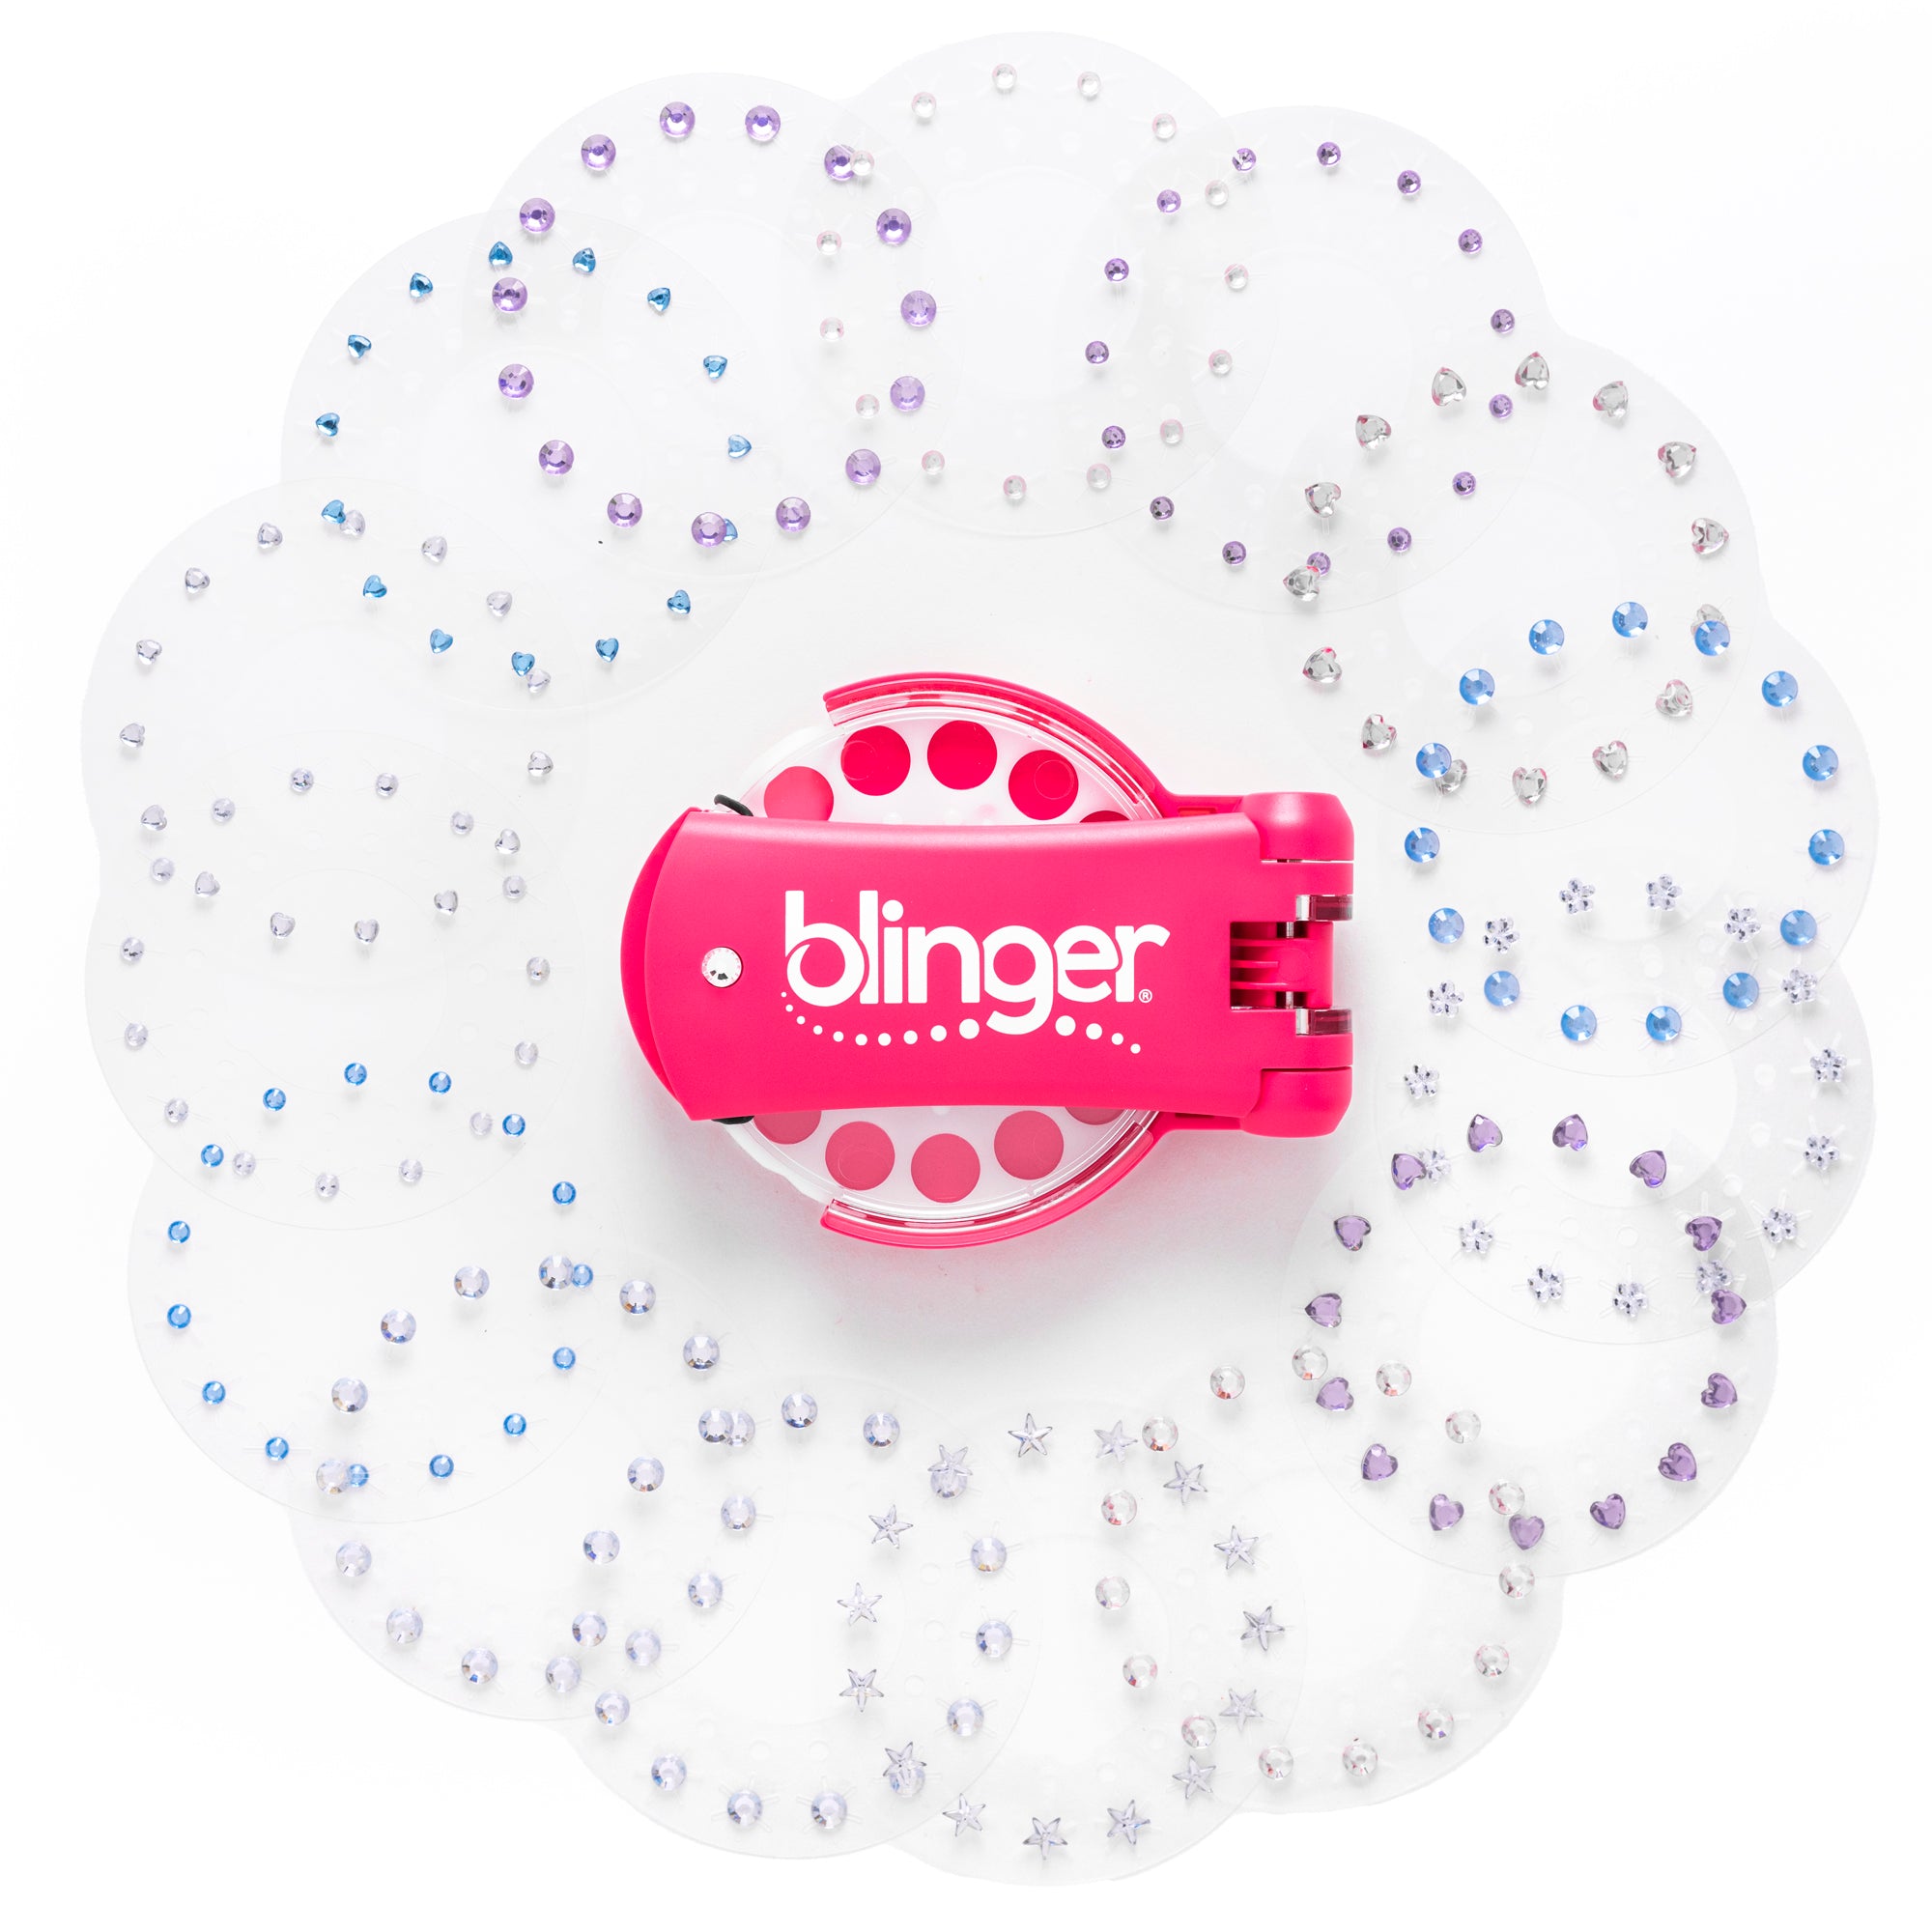 Blinger Diamond Collection Glam Gem Decorating Styling Bedazzle